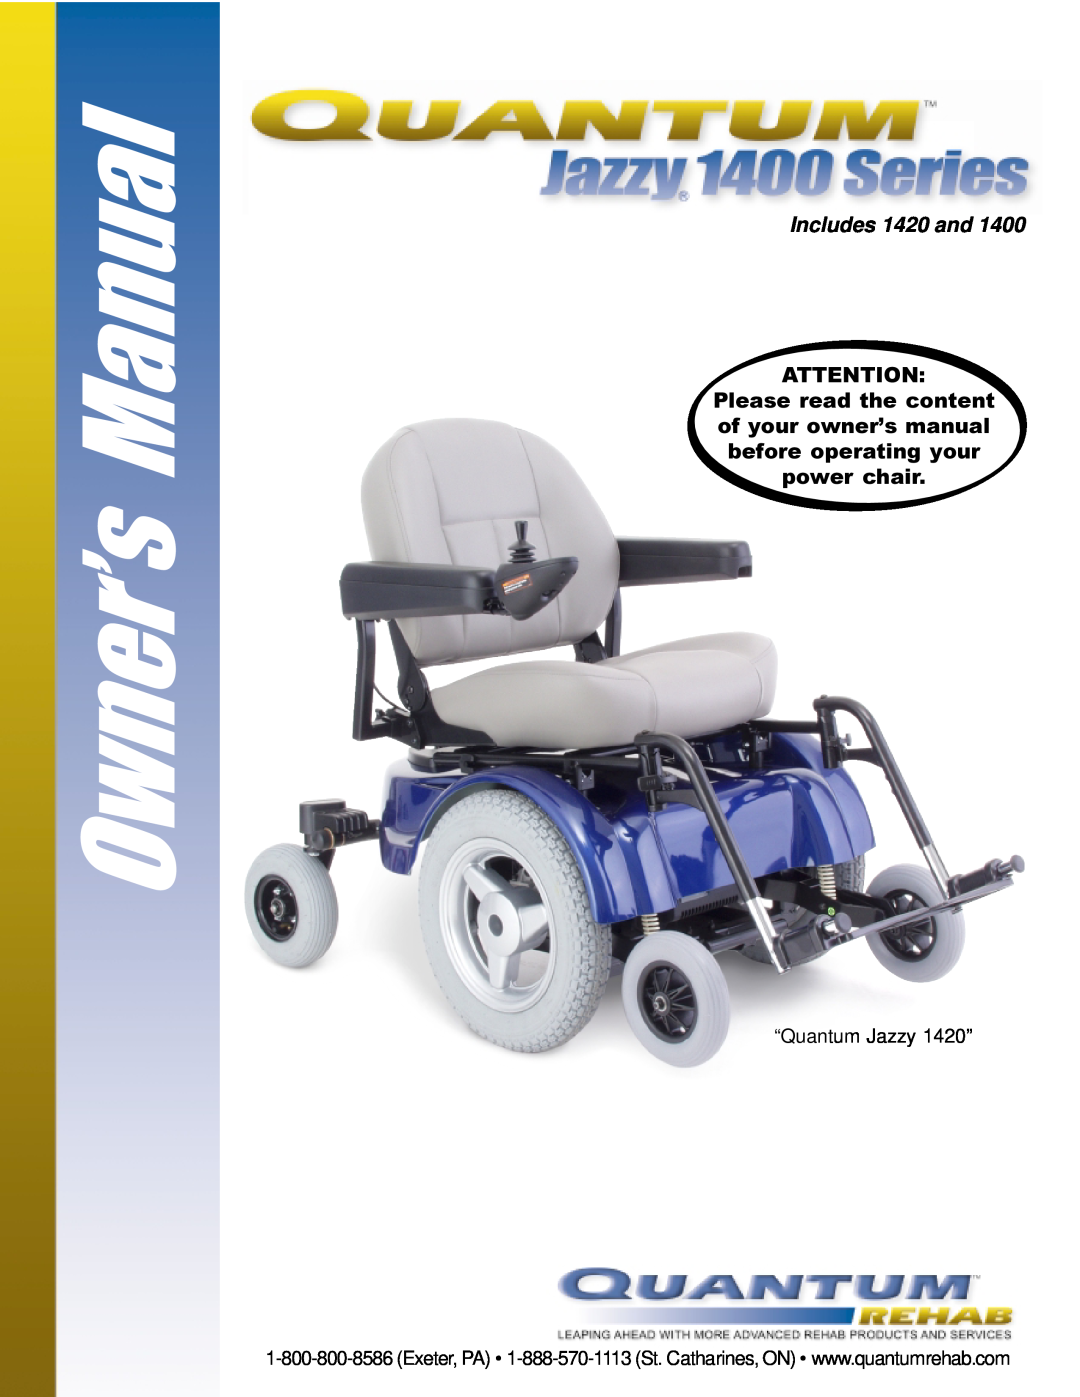 Pride Mobility manual Owner’s Manual, Includes 1420 and, “Quantum Jazzy 1420” 